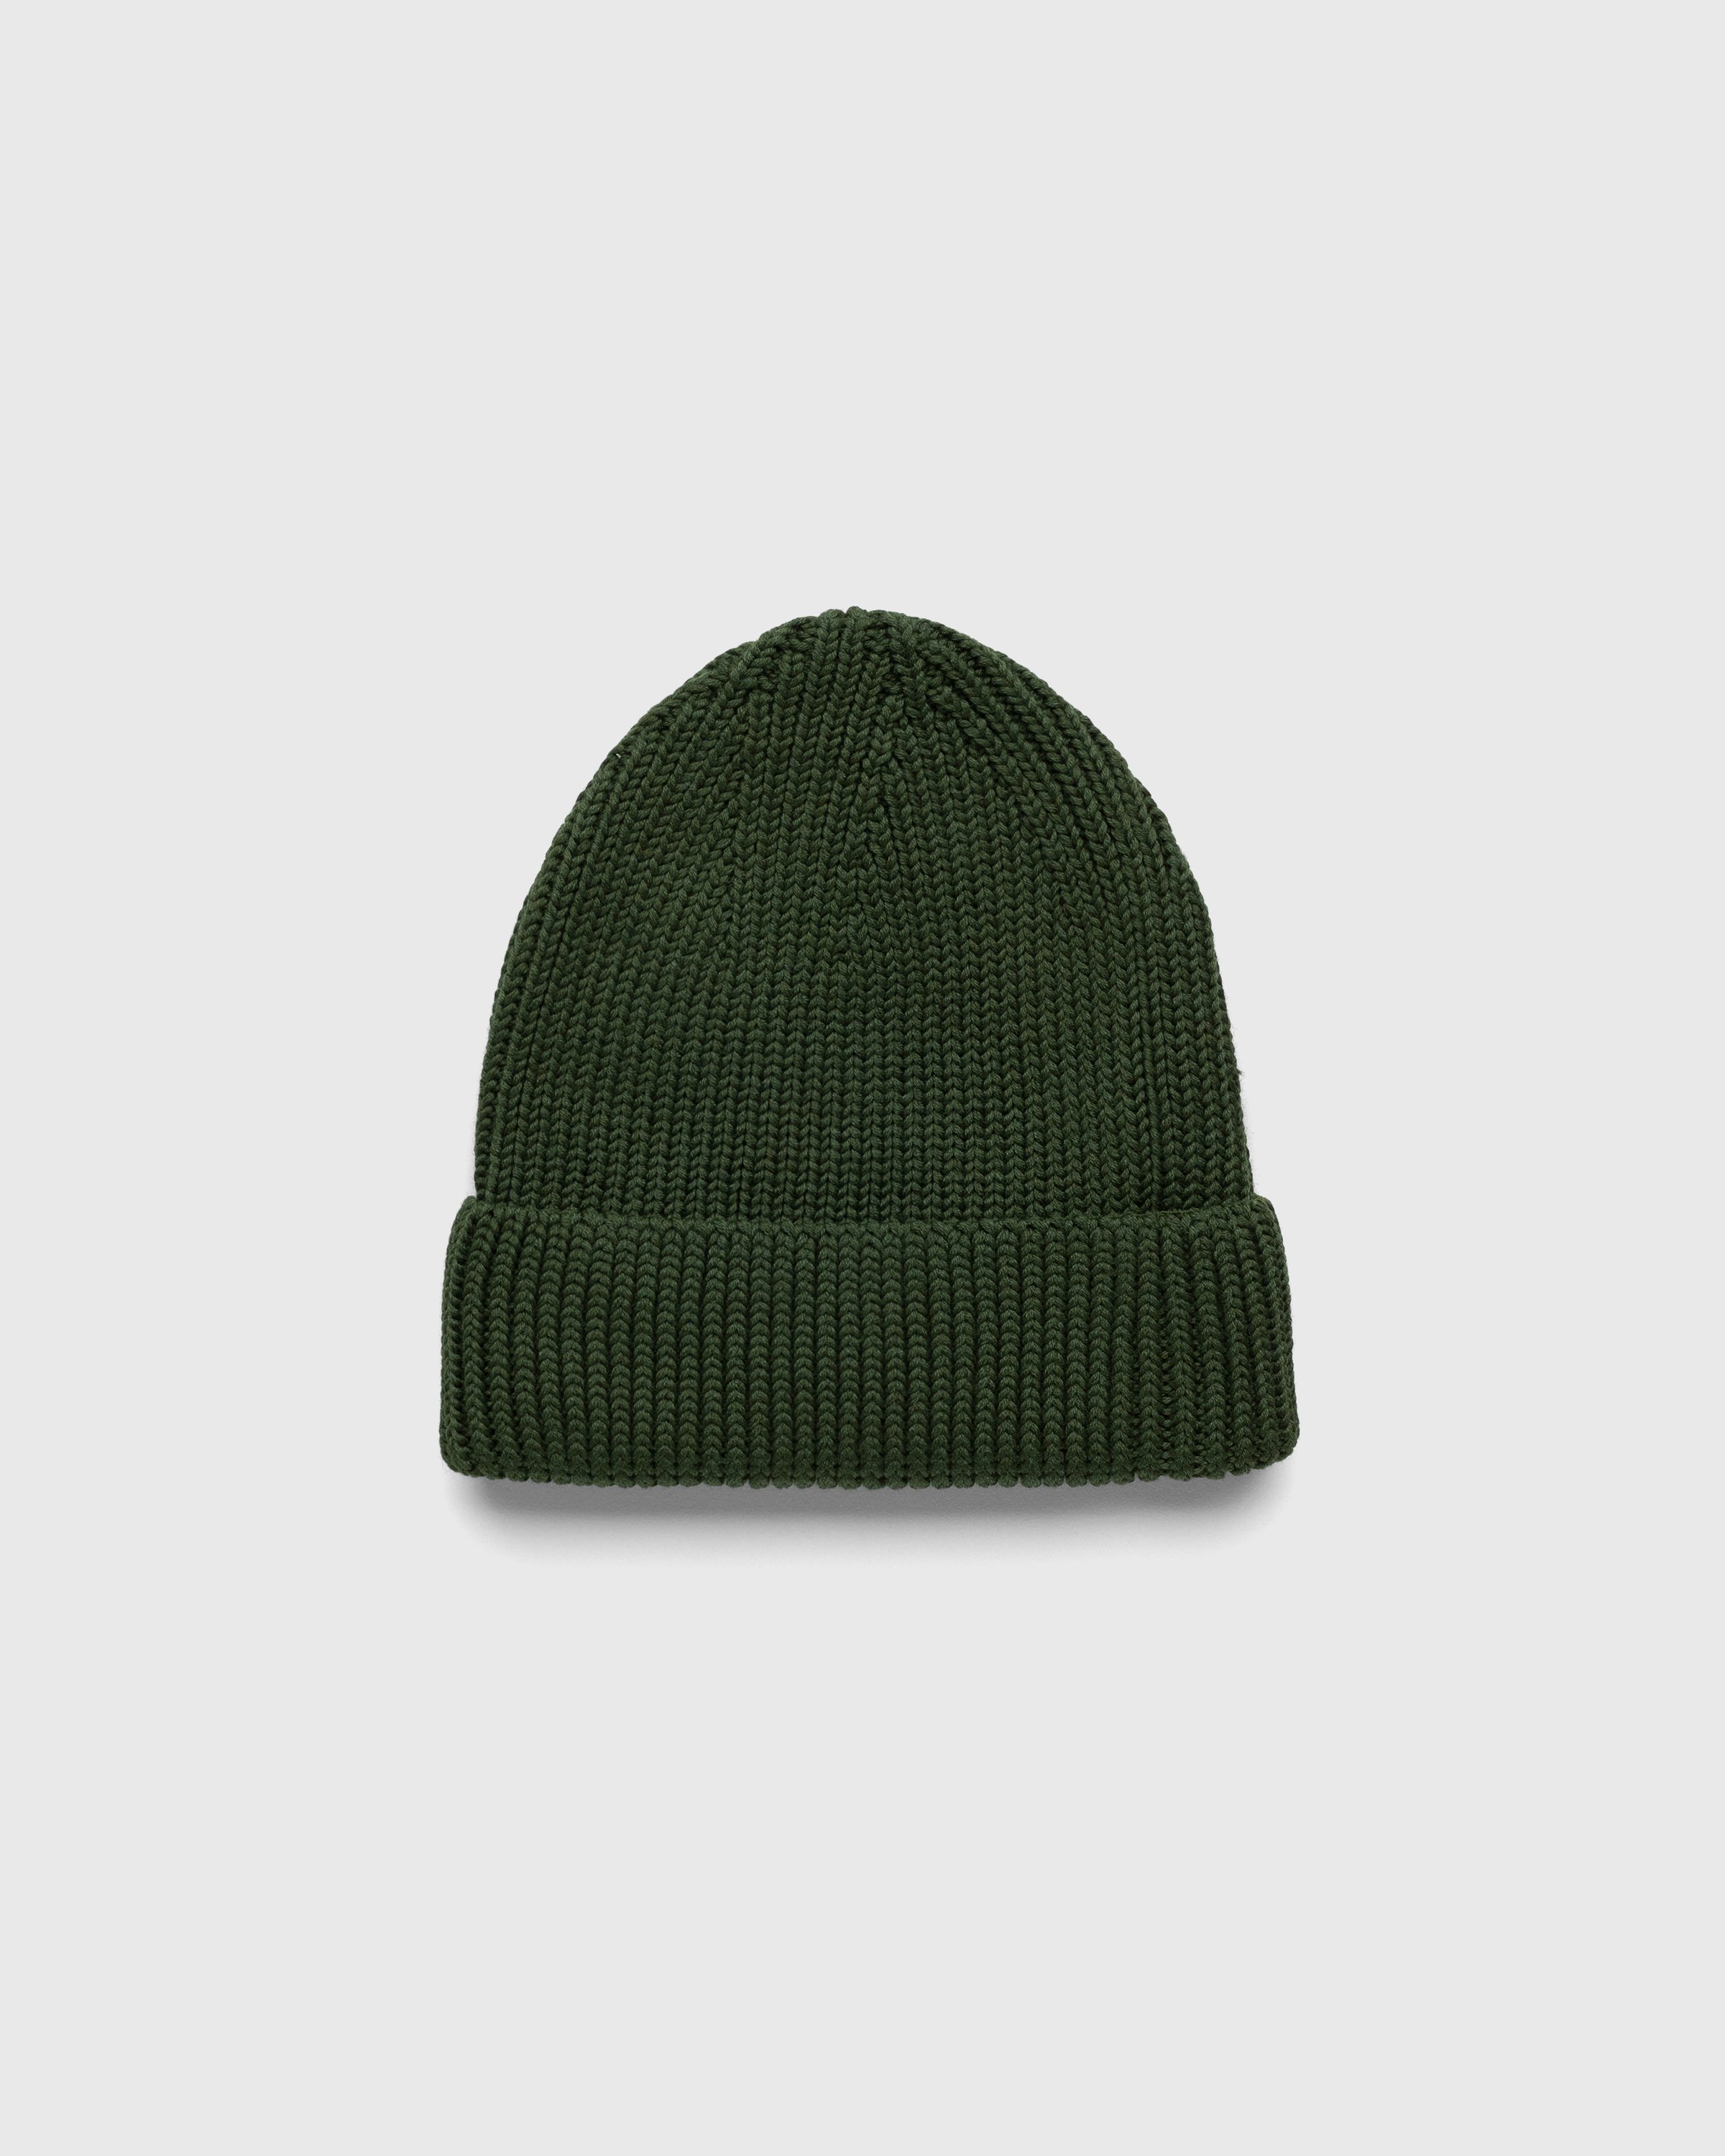 null - Wool Beanie Olive - Accessories - Green - Image 1